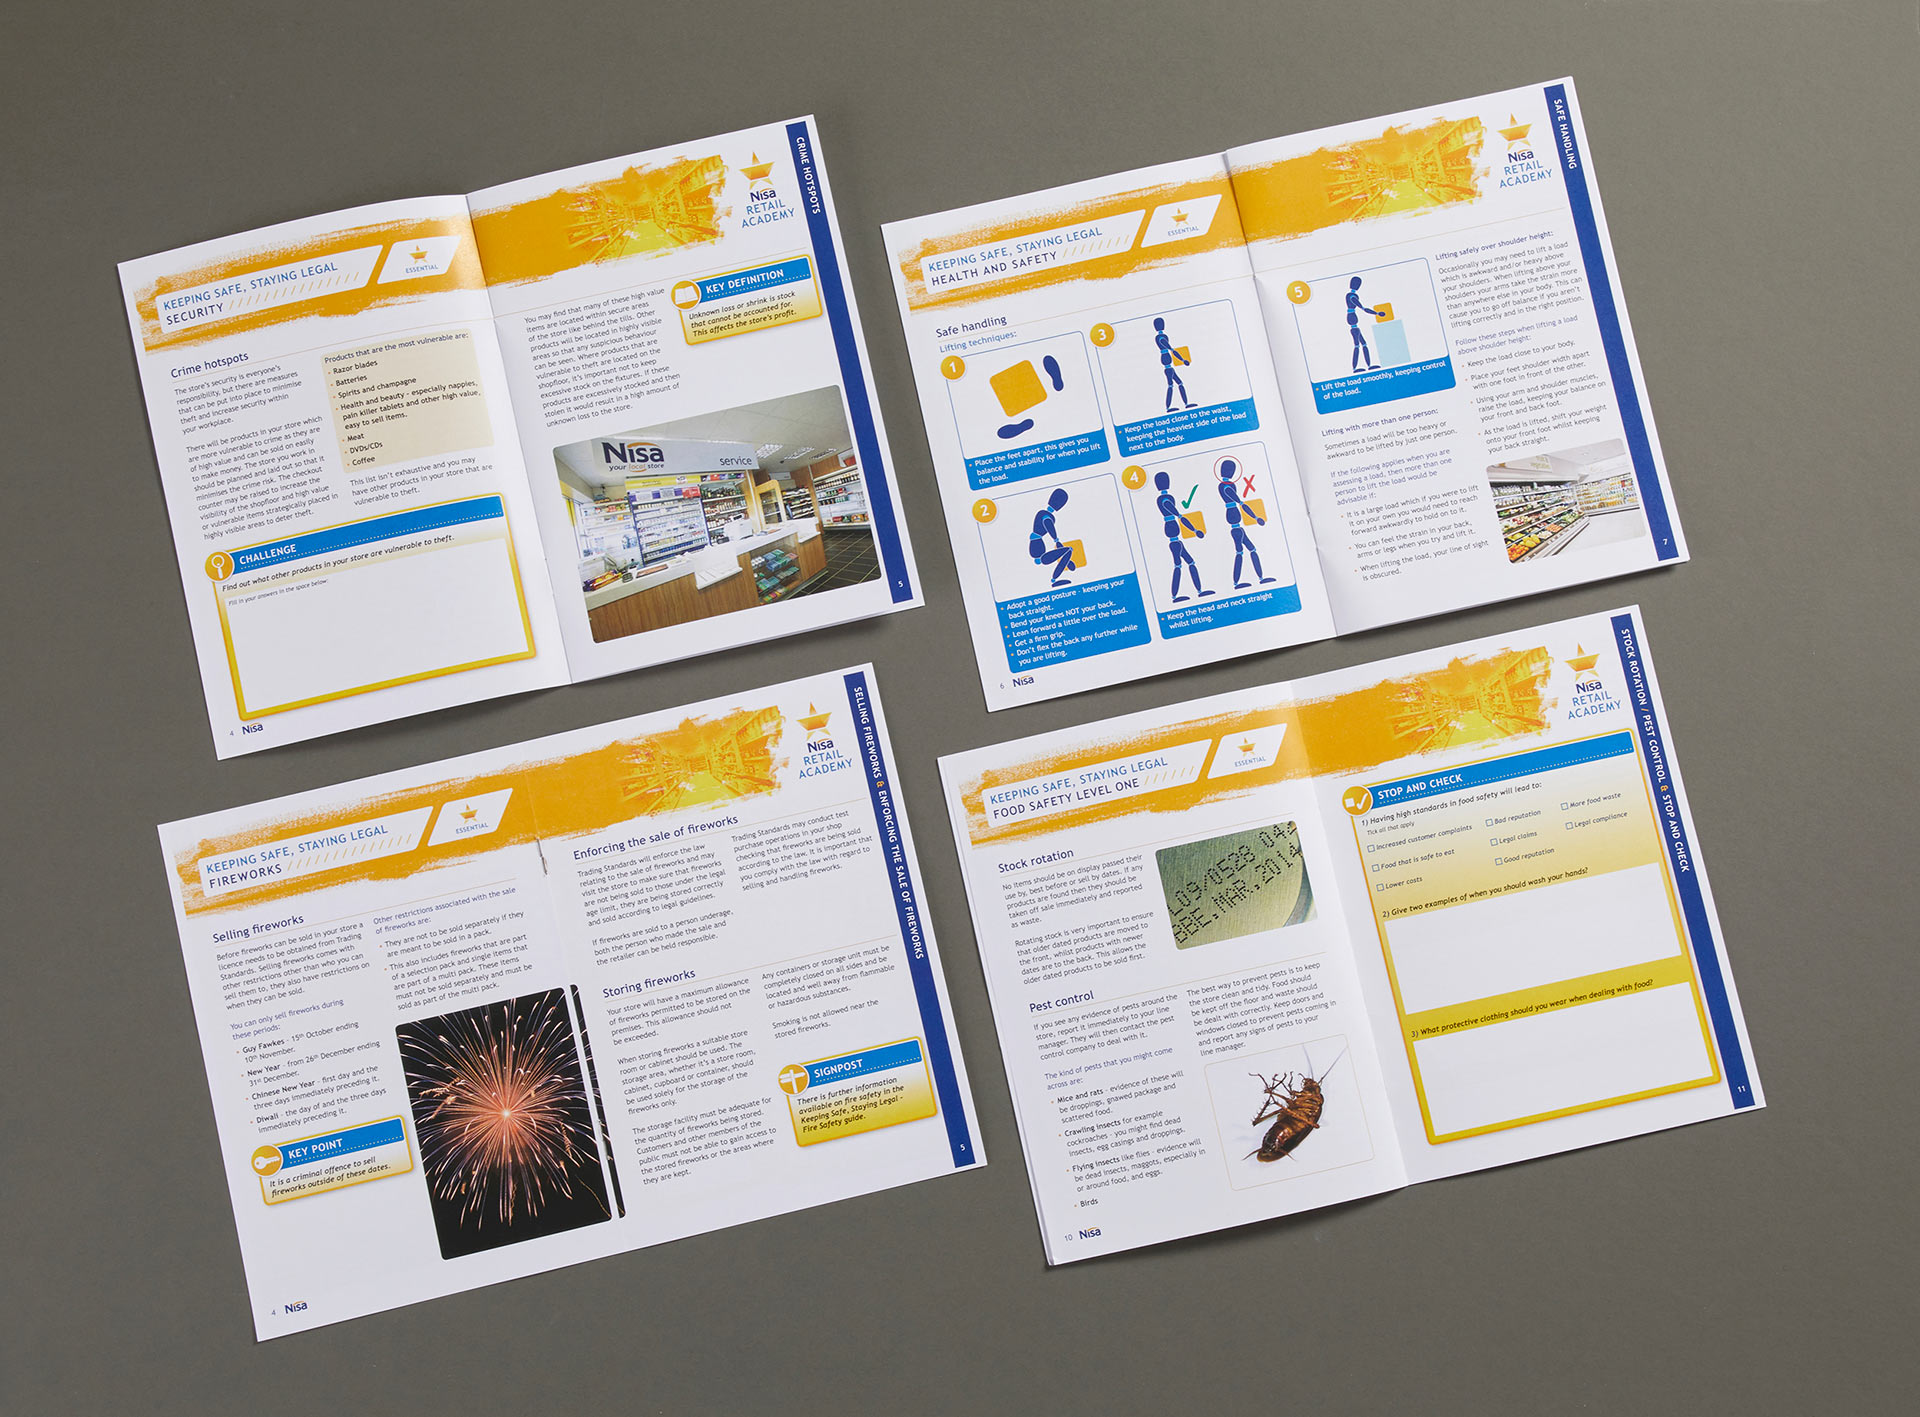 Nisa Retail Academy staff training programme visual identity and guides